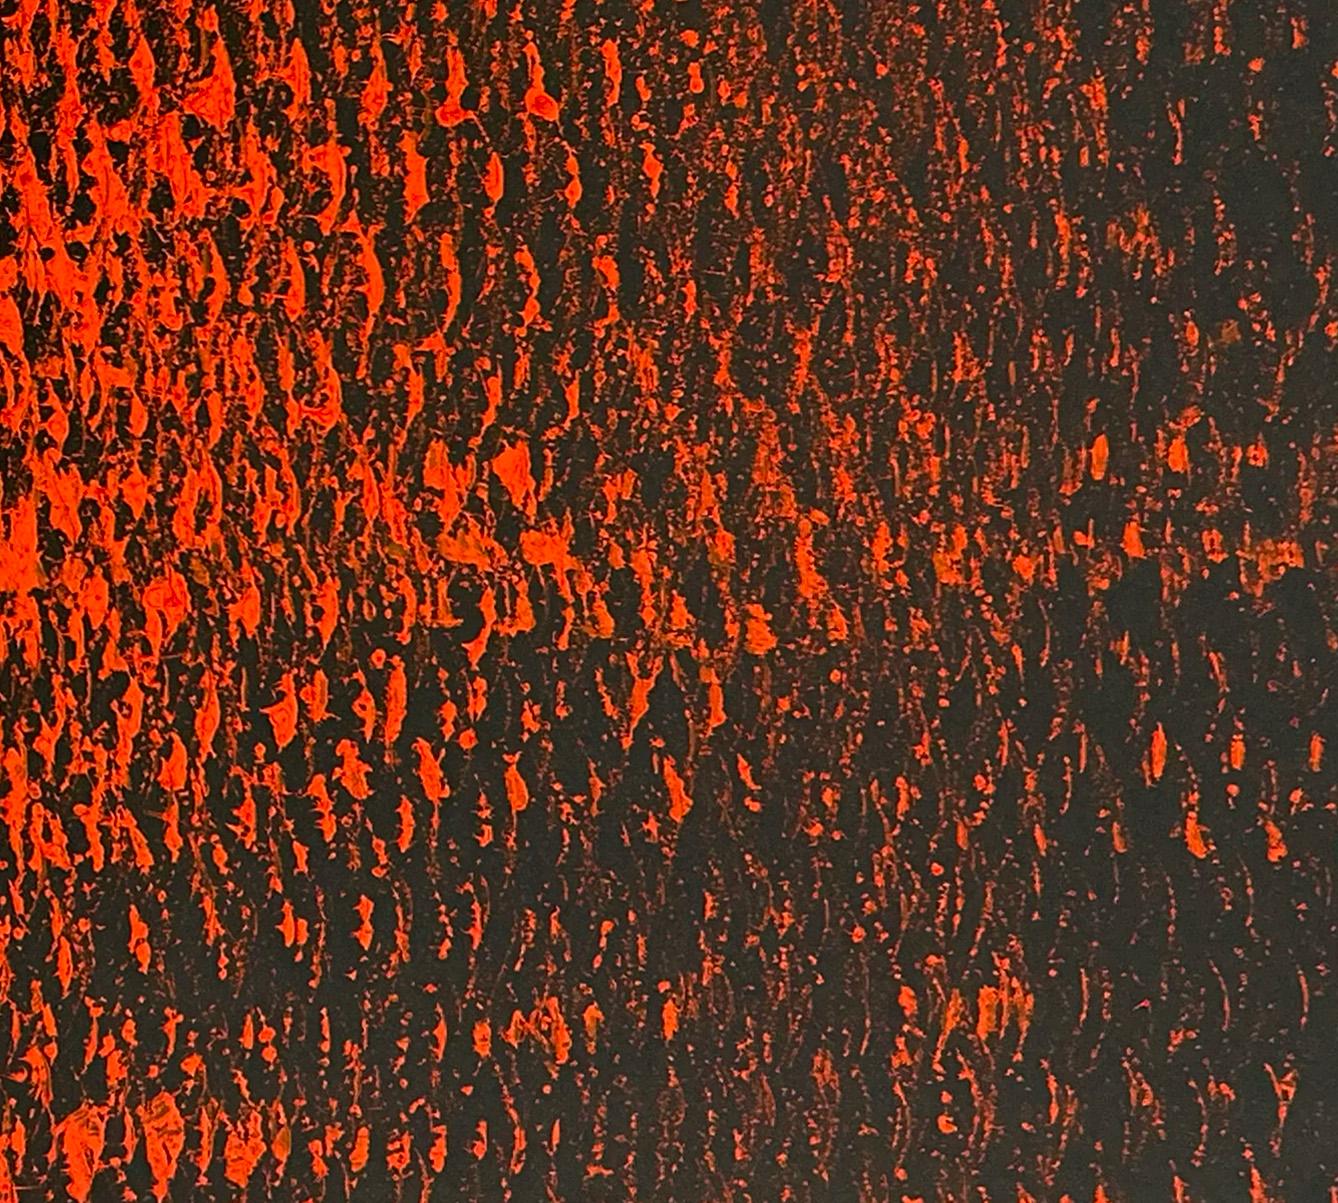 Red and Black II, Expanded Metal Painting, 2023 by Clemens Wolf
From the series Expanded Metal Paintings
Oil on paper
Size: 70 H x 50 W cm.
Hand-signed back by the artist
Unique

Expanded Metal Paintings 
The panel paintings 